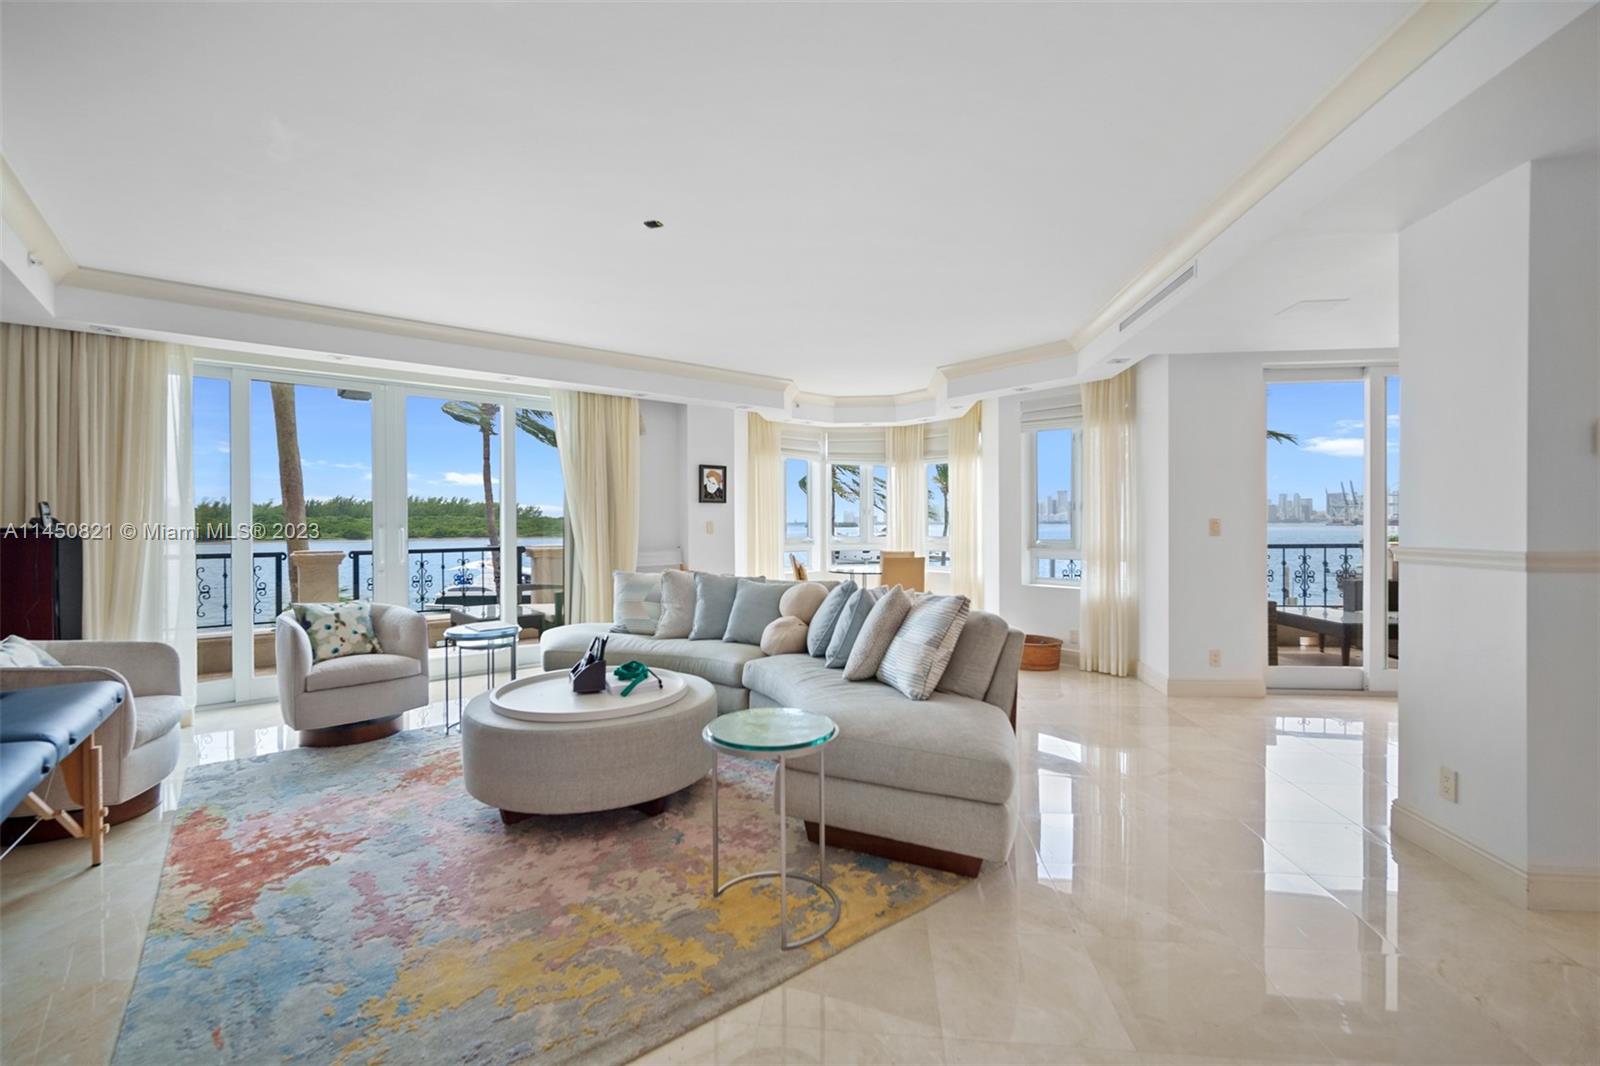 BAYSIDE Bright 4 bedrooms and 4 baths, spacious living room and dining area with views of downtown skyline and ocean views. Large foyer entry and a  spacious renovated kitchen.  Available from October 15 to April 15th. Amenities fees additional.